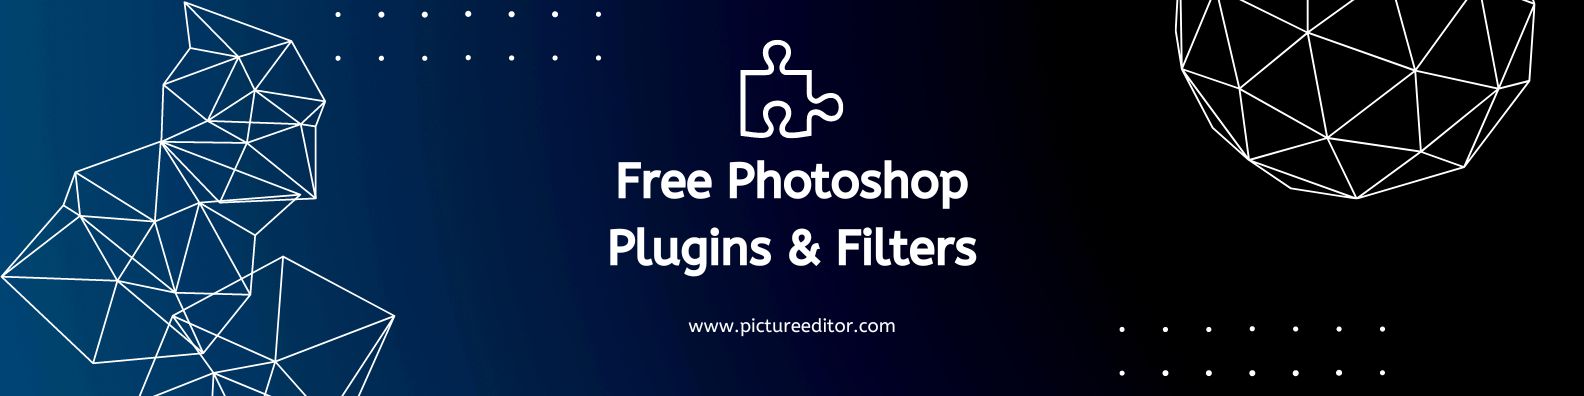 Free Photoshop Plugins & Filters